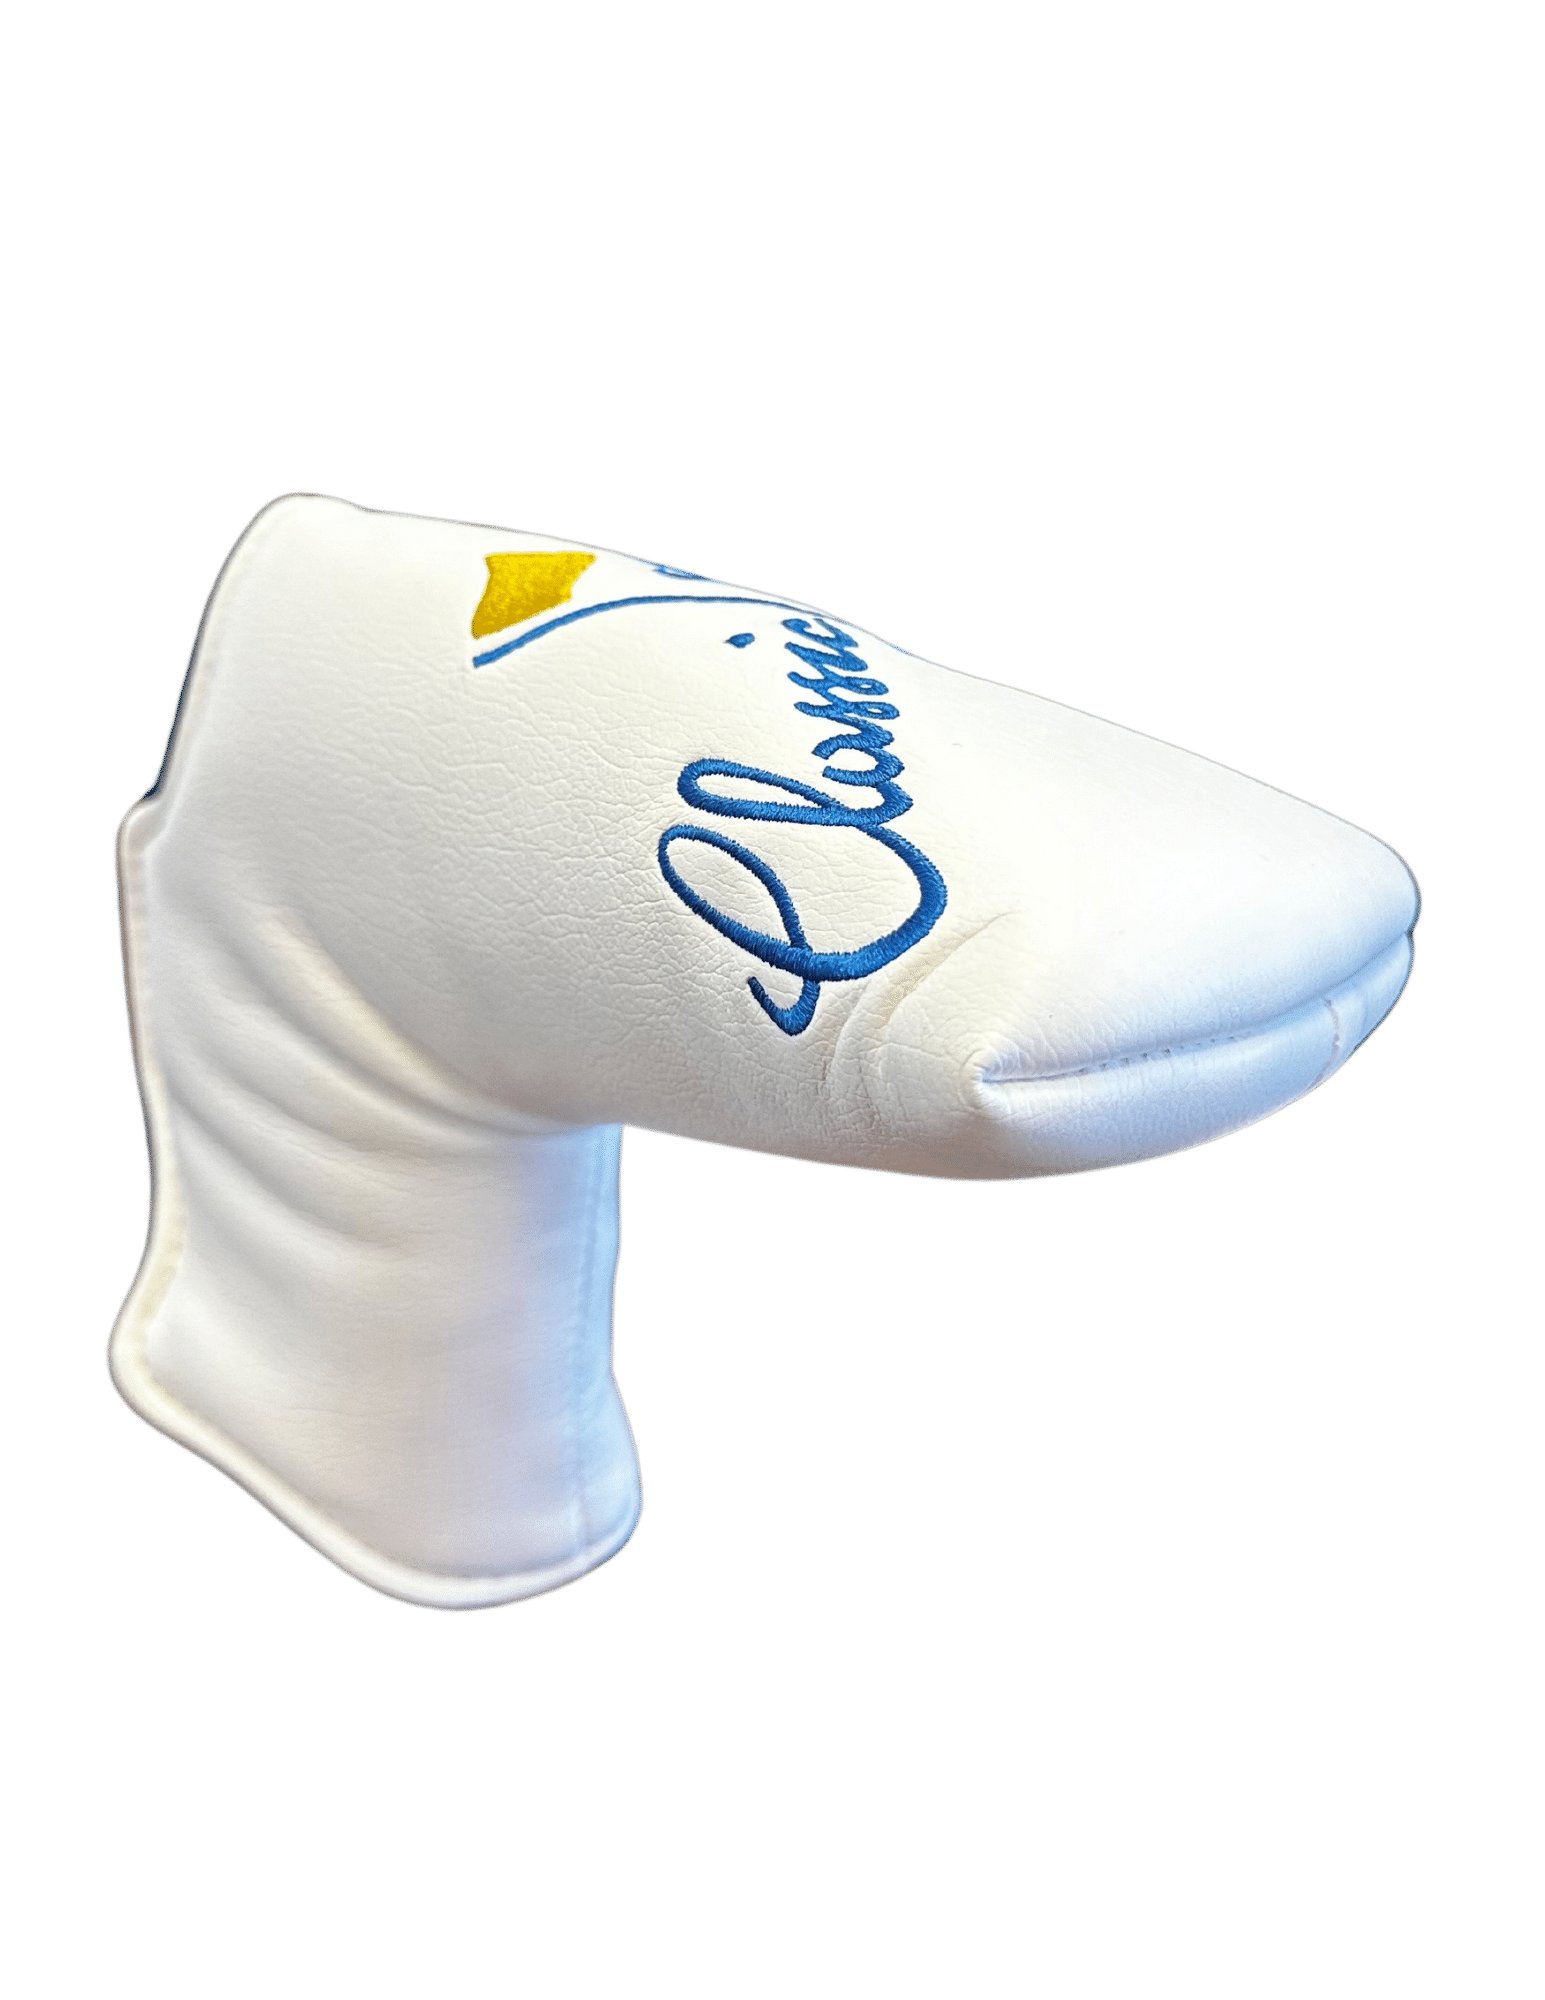 AM&E Logoed Blade Putter Cover